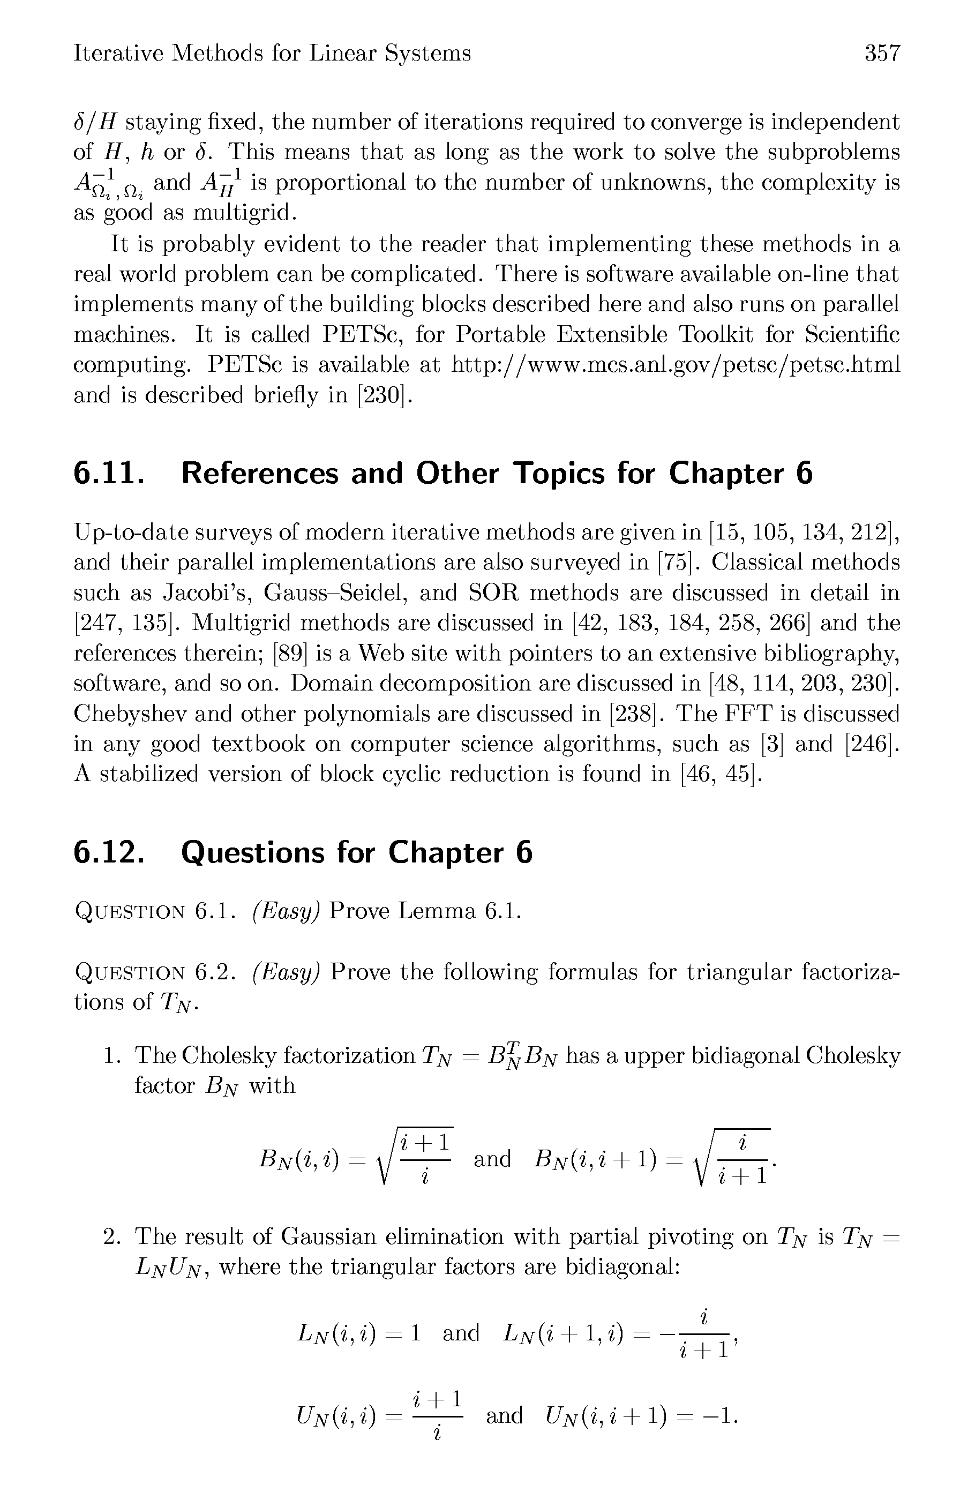 6.11 References and Other Topics for Chapter 6
6.12 Questions for Chapter 6